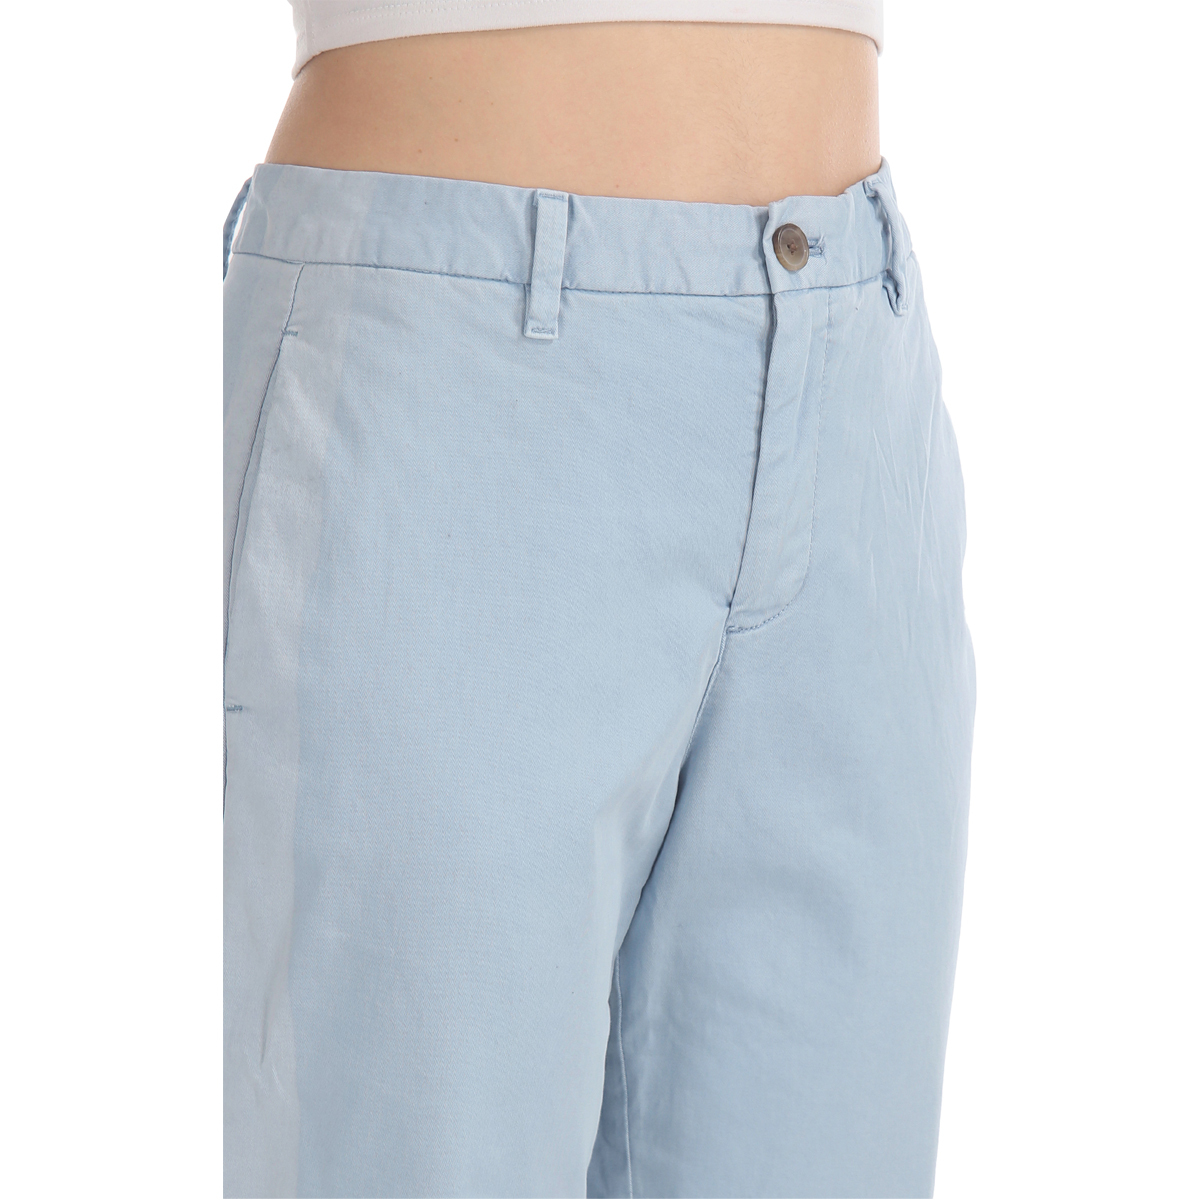 Gap Mid Rise Girlfriend Fit Solid Color Trouser Styled with Raw Hem & Faded Side Seam Line - Blue, Size-8